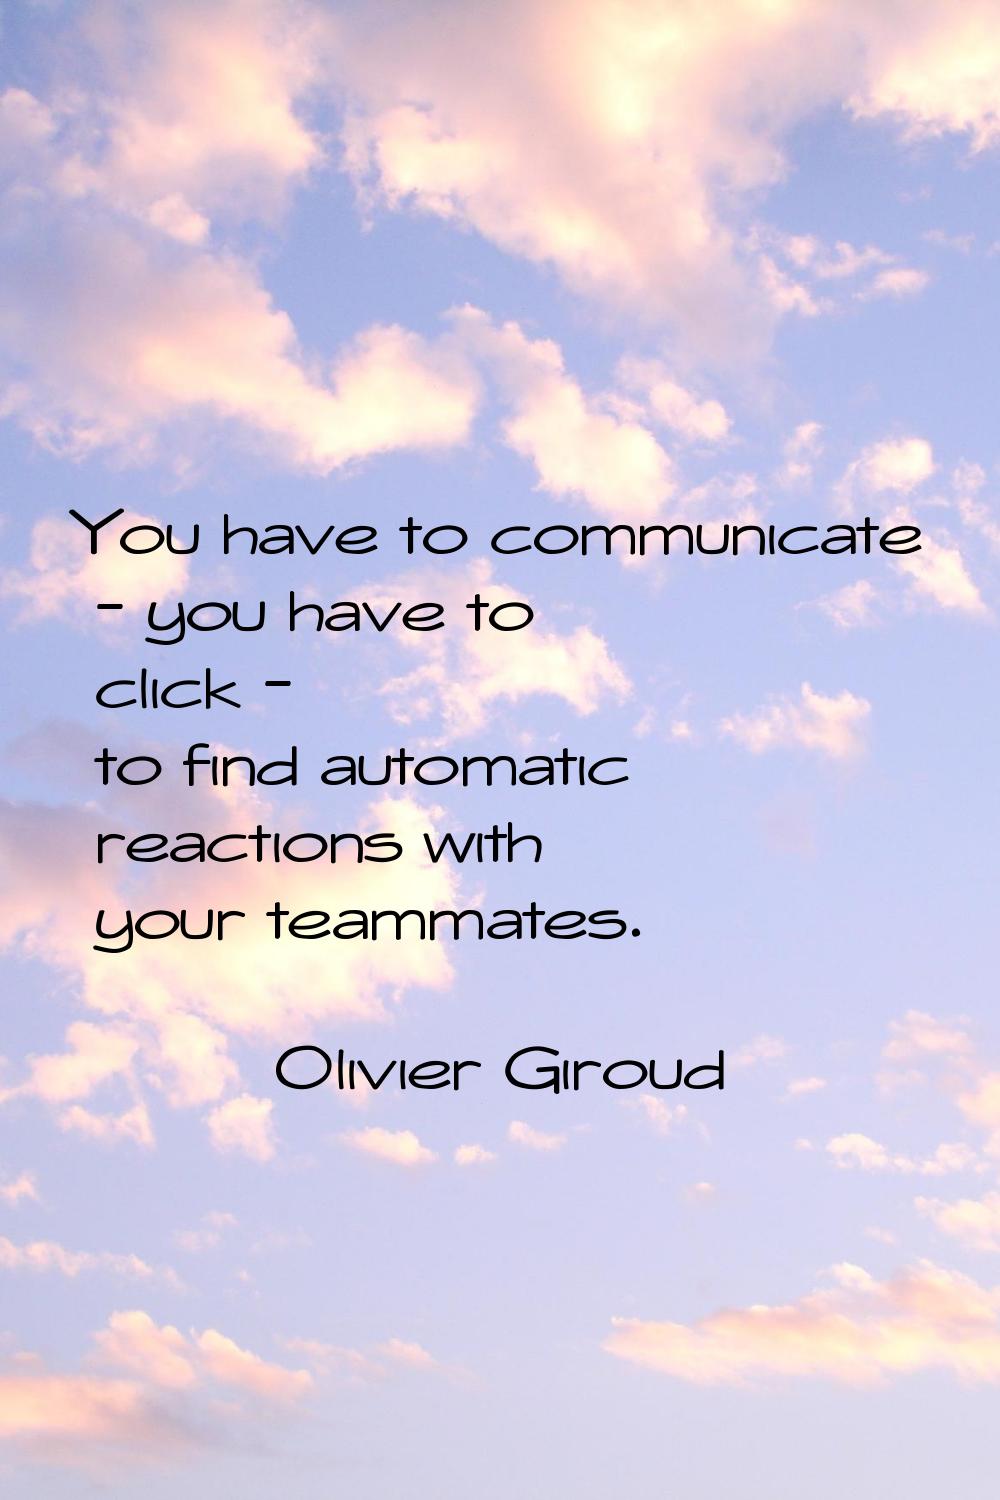 You have to communicate - you have to click - to find automatic reactions with your teammates.